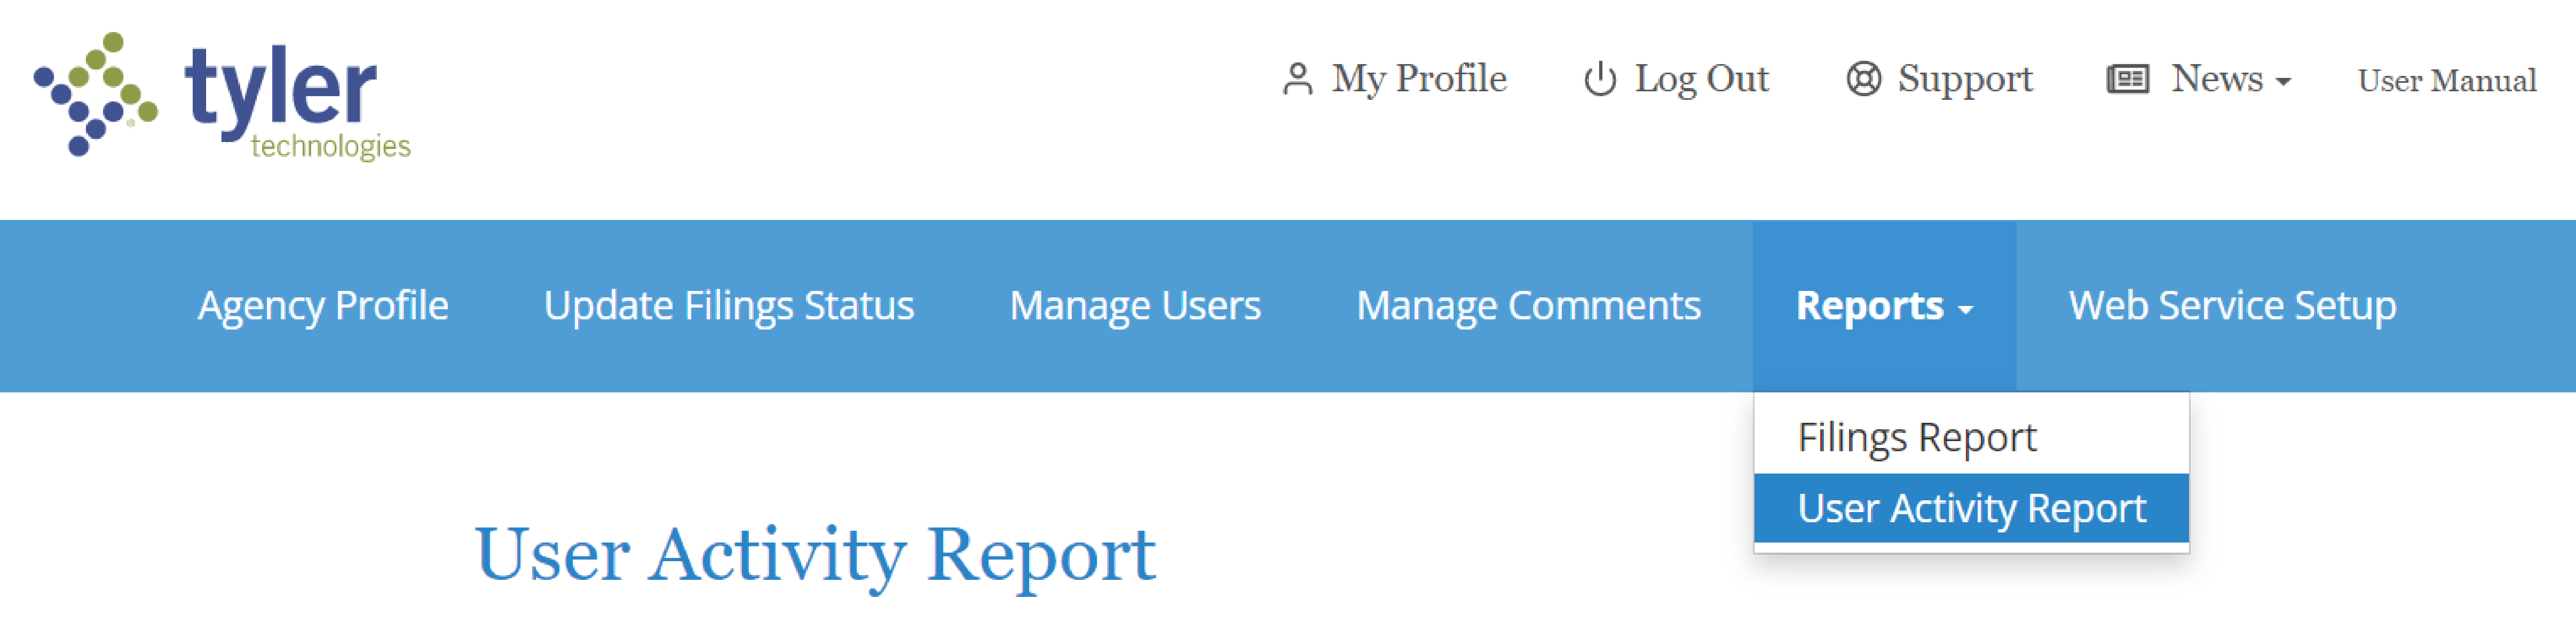 To access the User Activity Report, select Report and then User Activity Report from the dropdown menu.